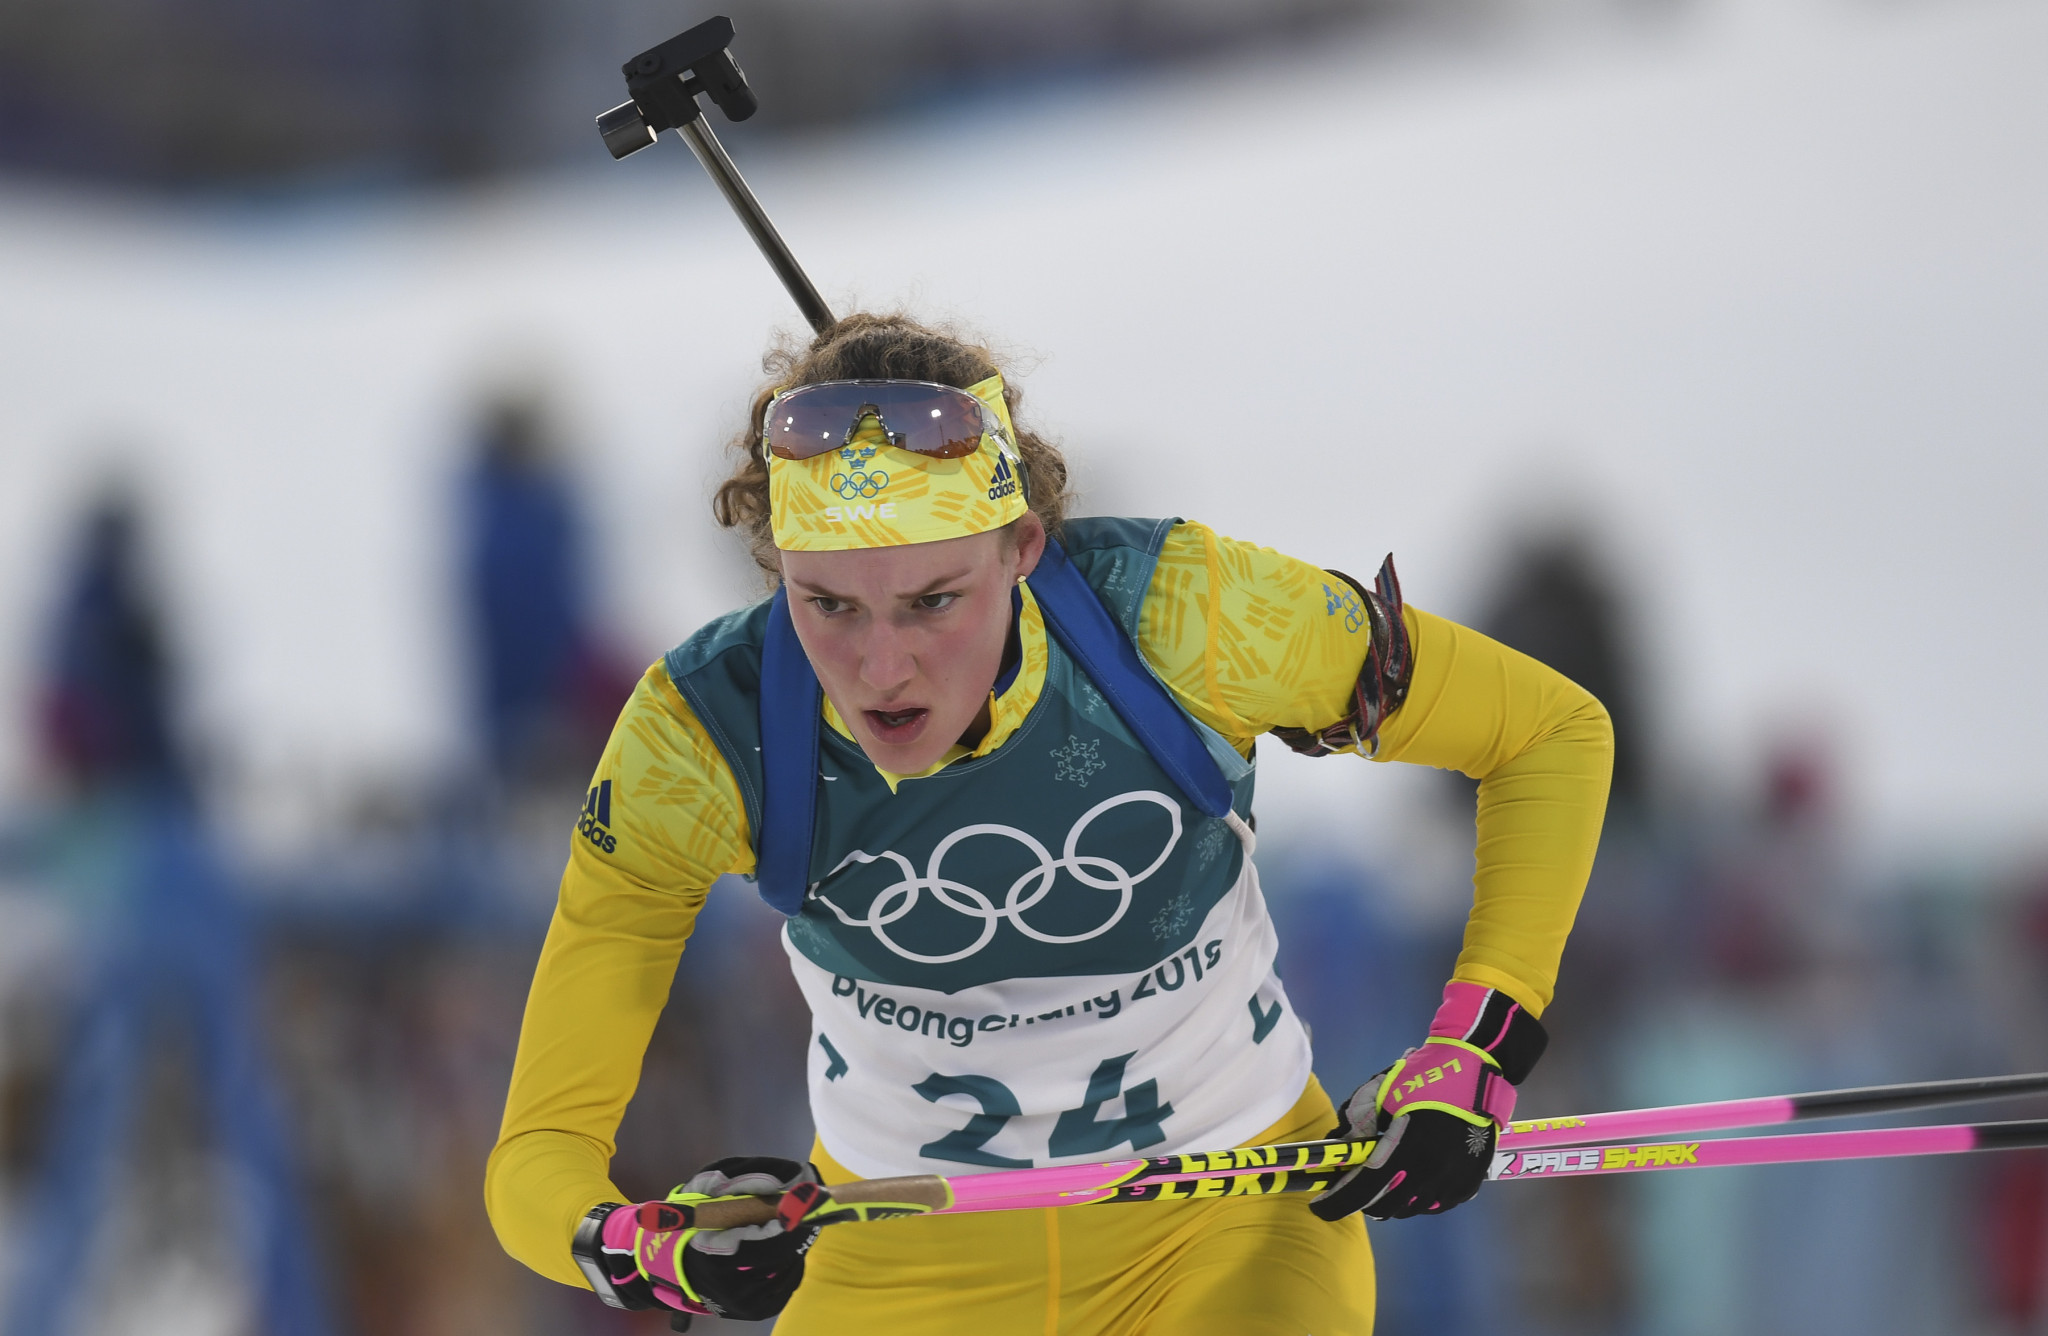 Hanna Oberg shot flawlessly on the way to victory ©Getty Images